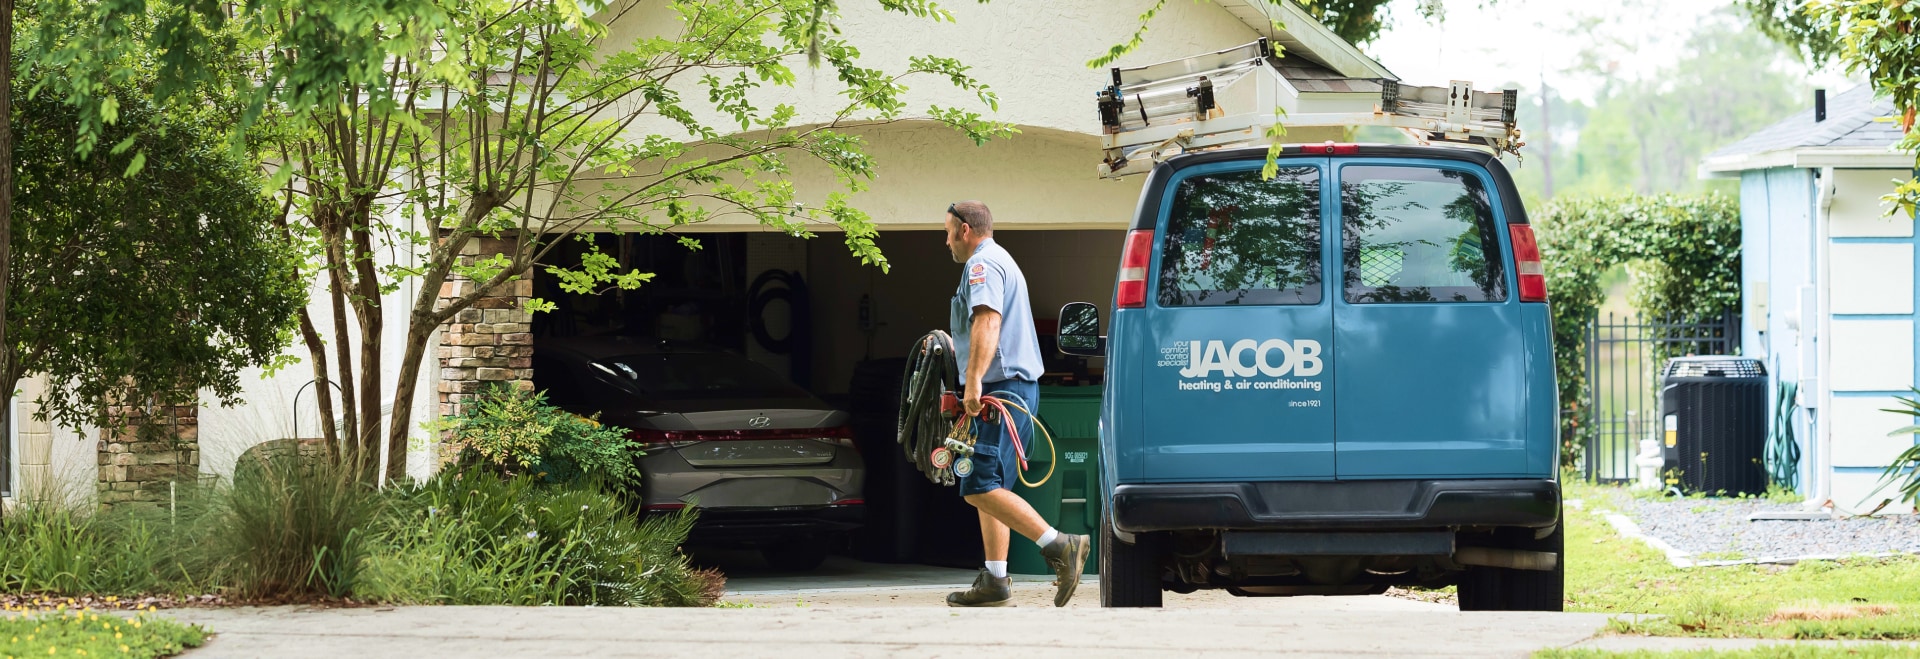 Jacob Heating & Air Conditioning technician walking away from company van with logo, while carrying equipment towards a house